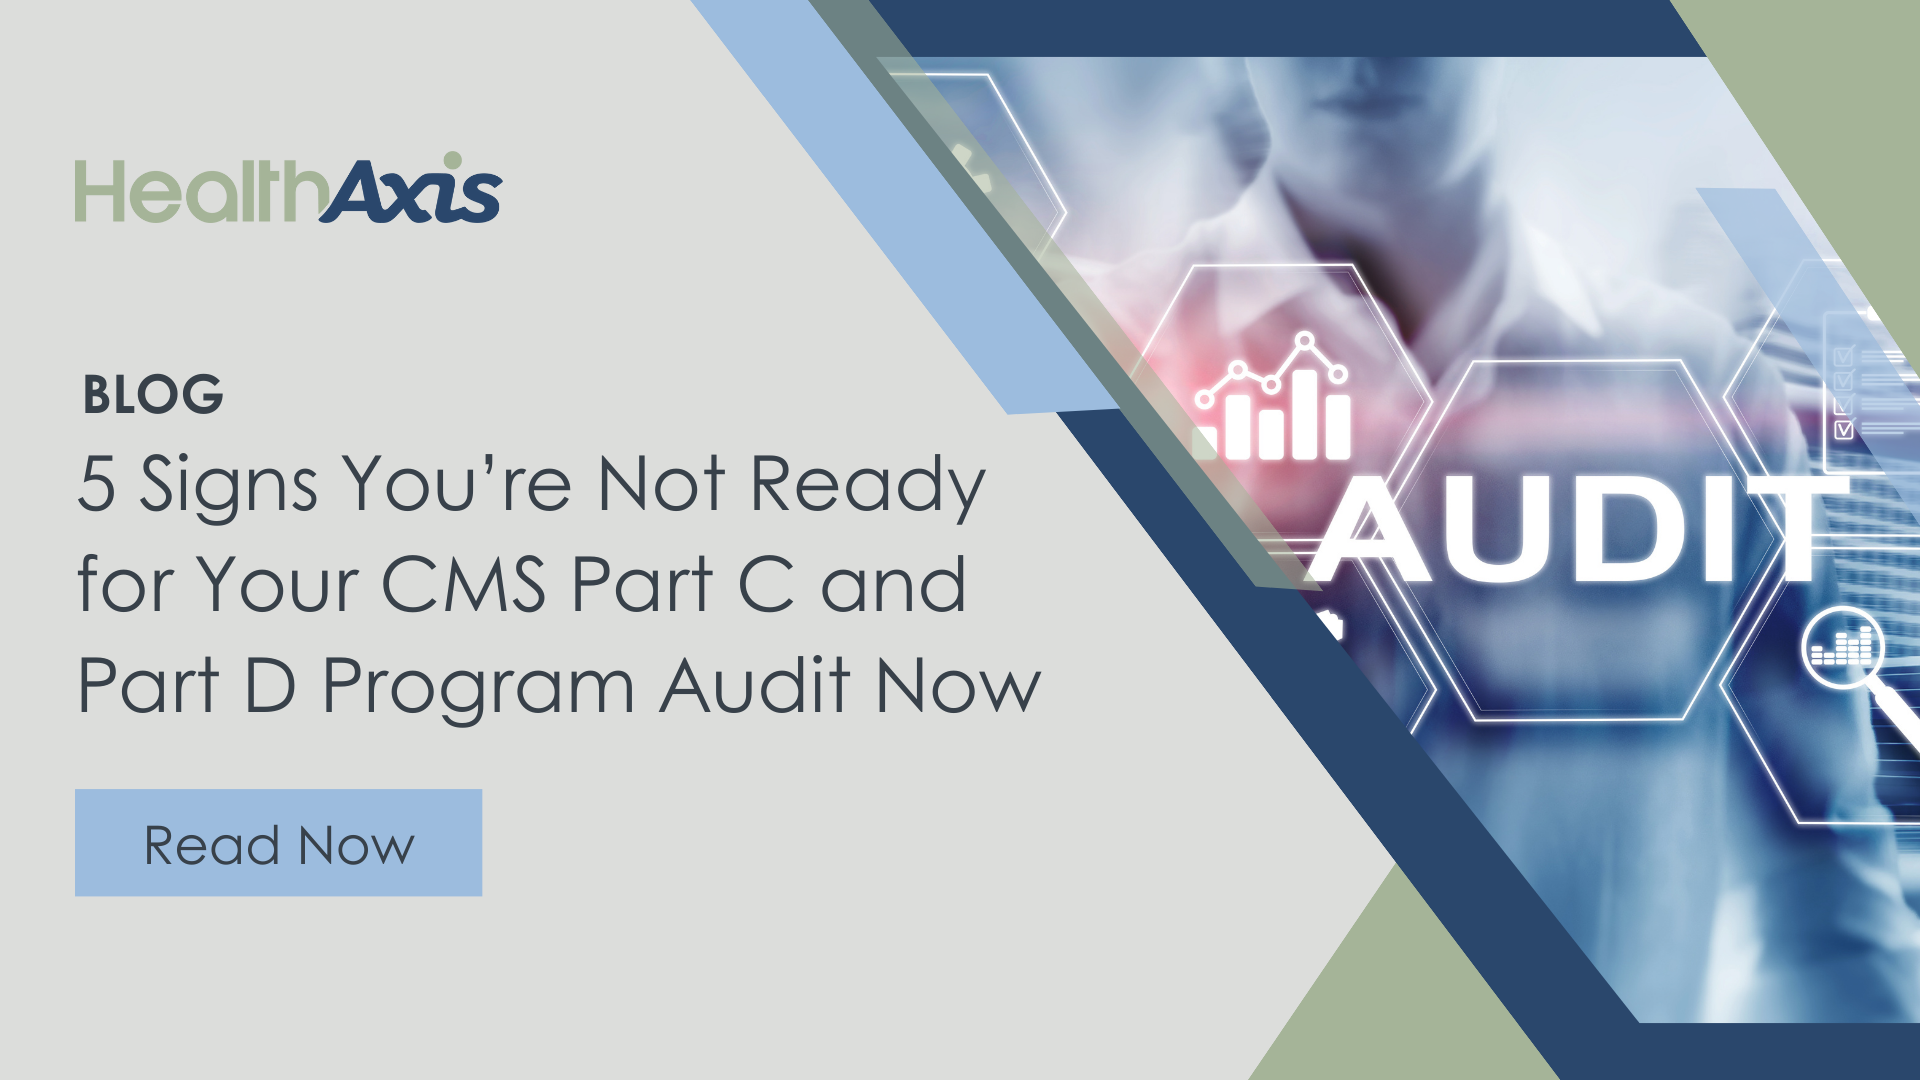 5 Signs You’re Not Ready for Your CMS Part C and Part D Program Audit Now